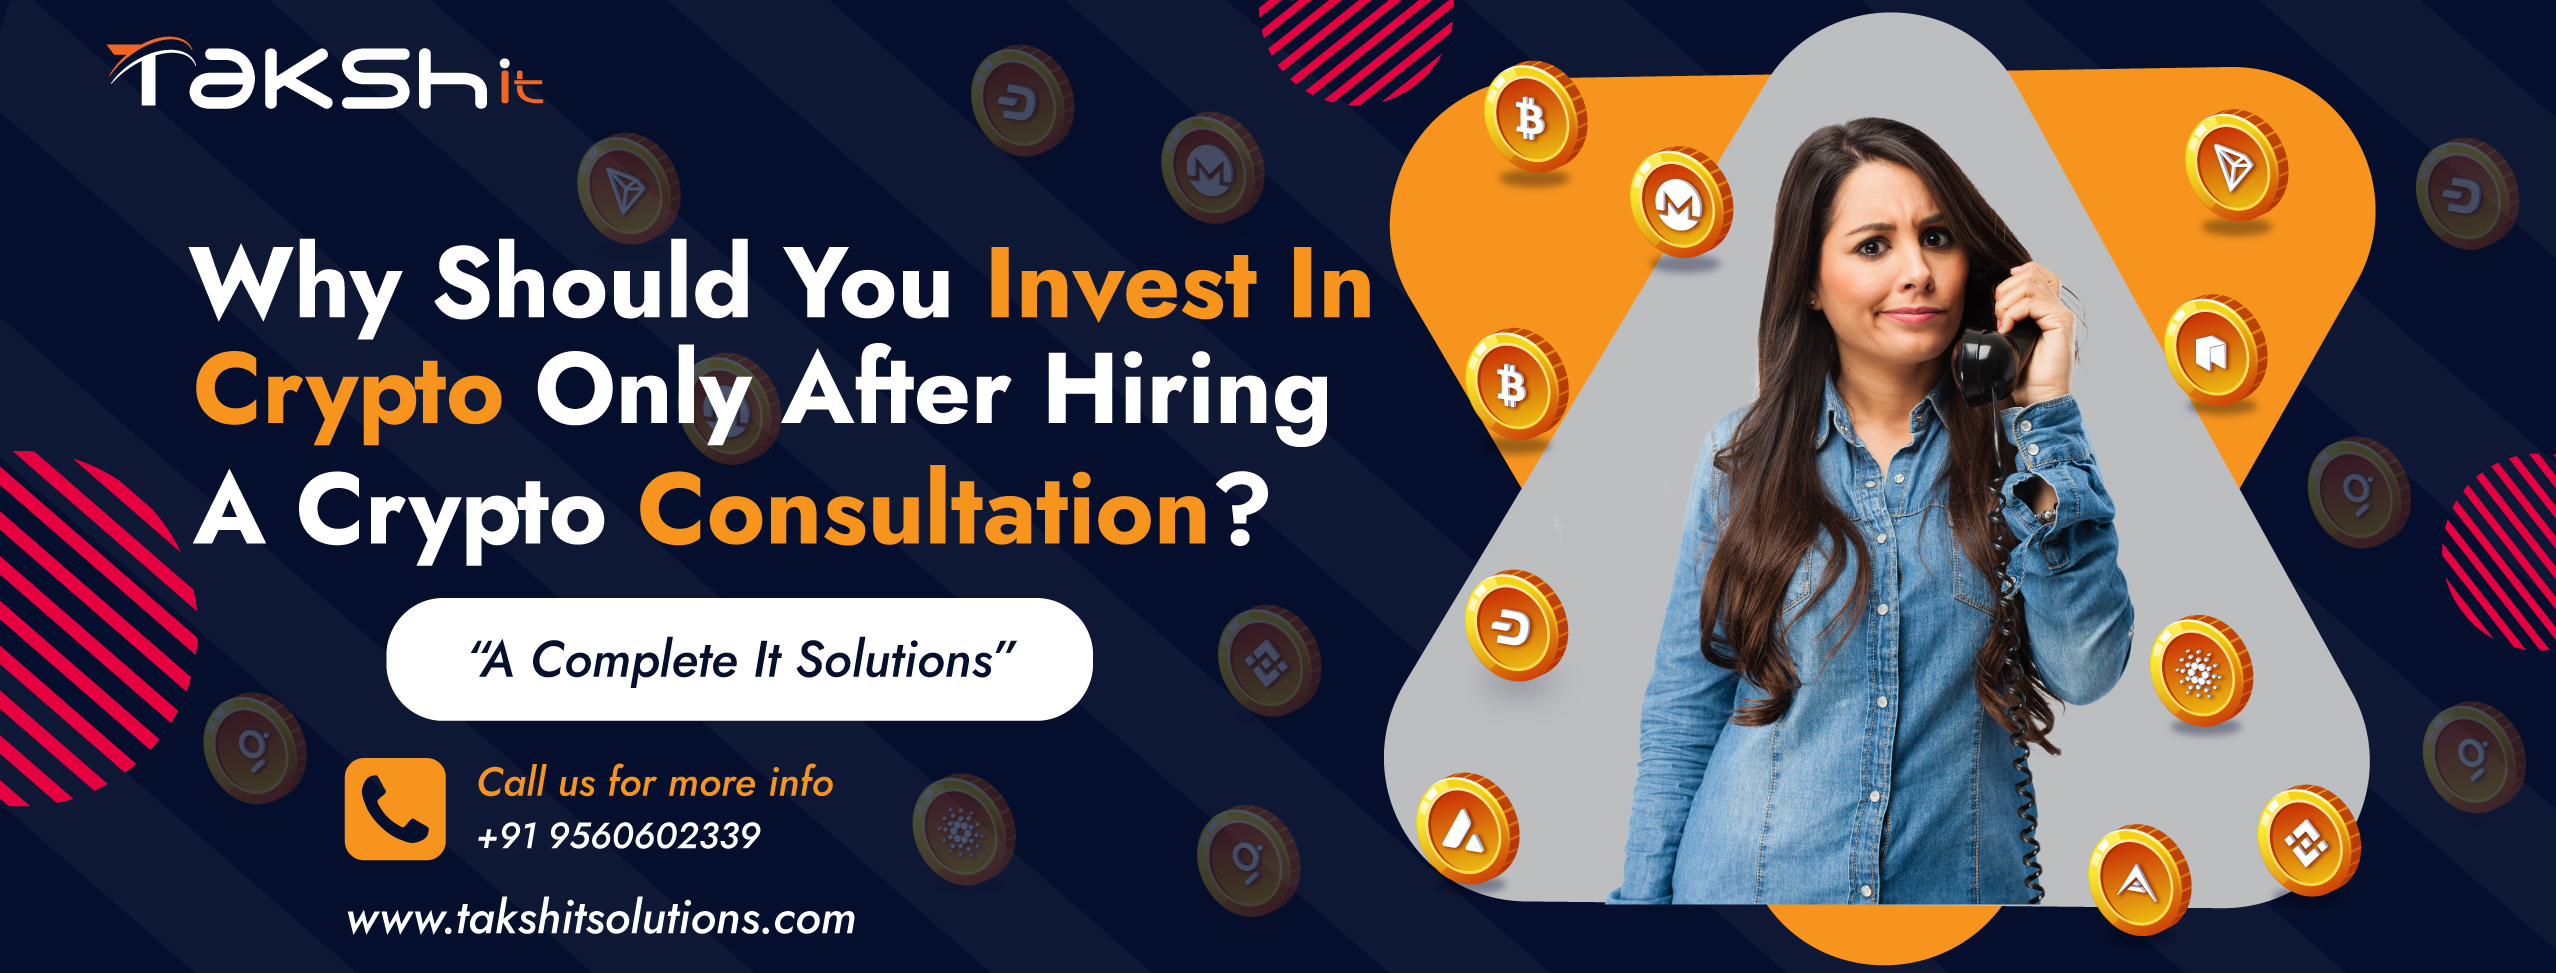 Why should you invest in crypto only after hiring a crypto consultation?